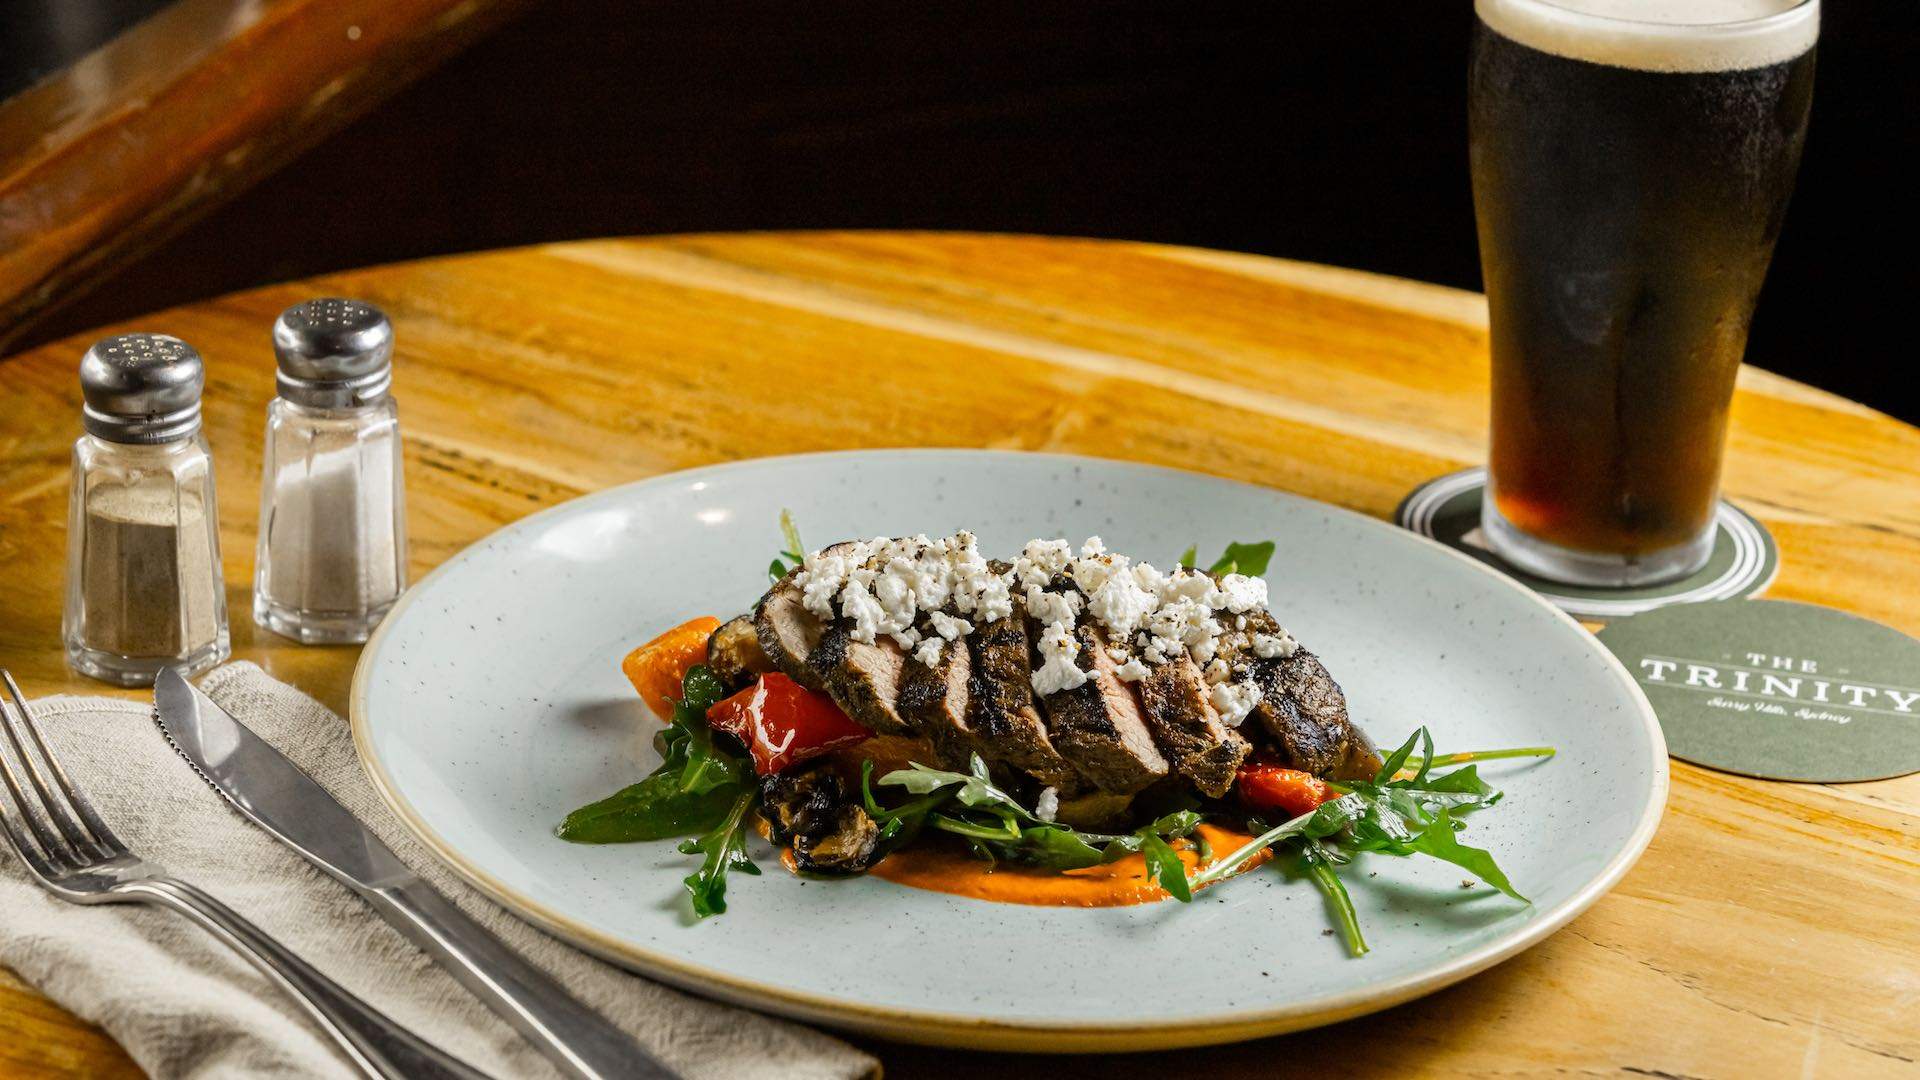 Seven Sydney Pubs with Menus That Go Beyond Standard Counter Meals